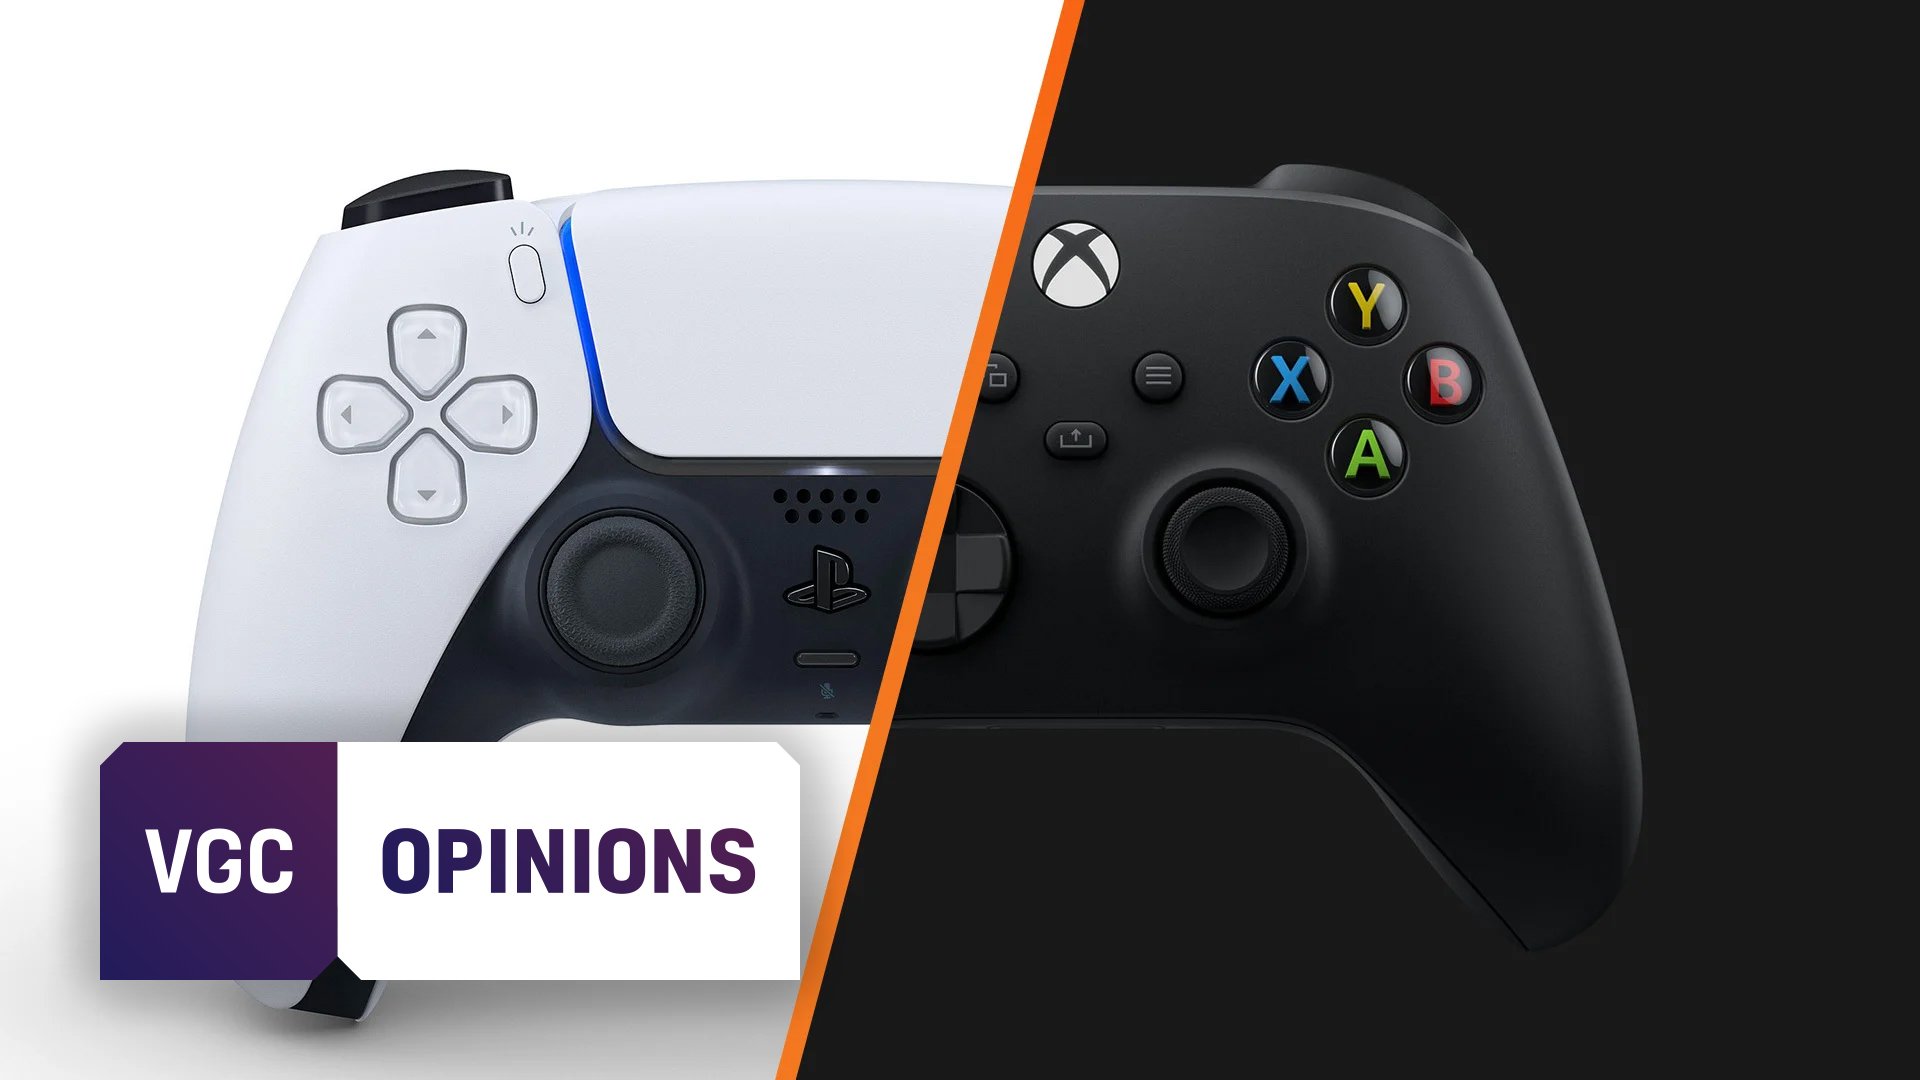 The war between Xbox and Playstation is no longer about consoles